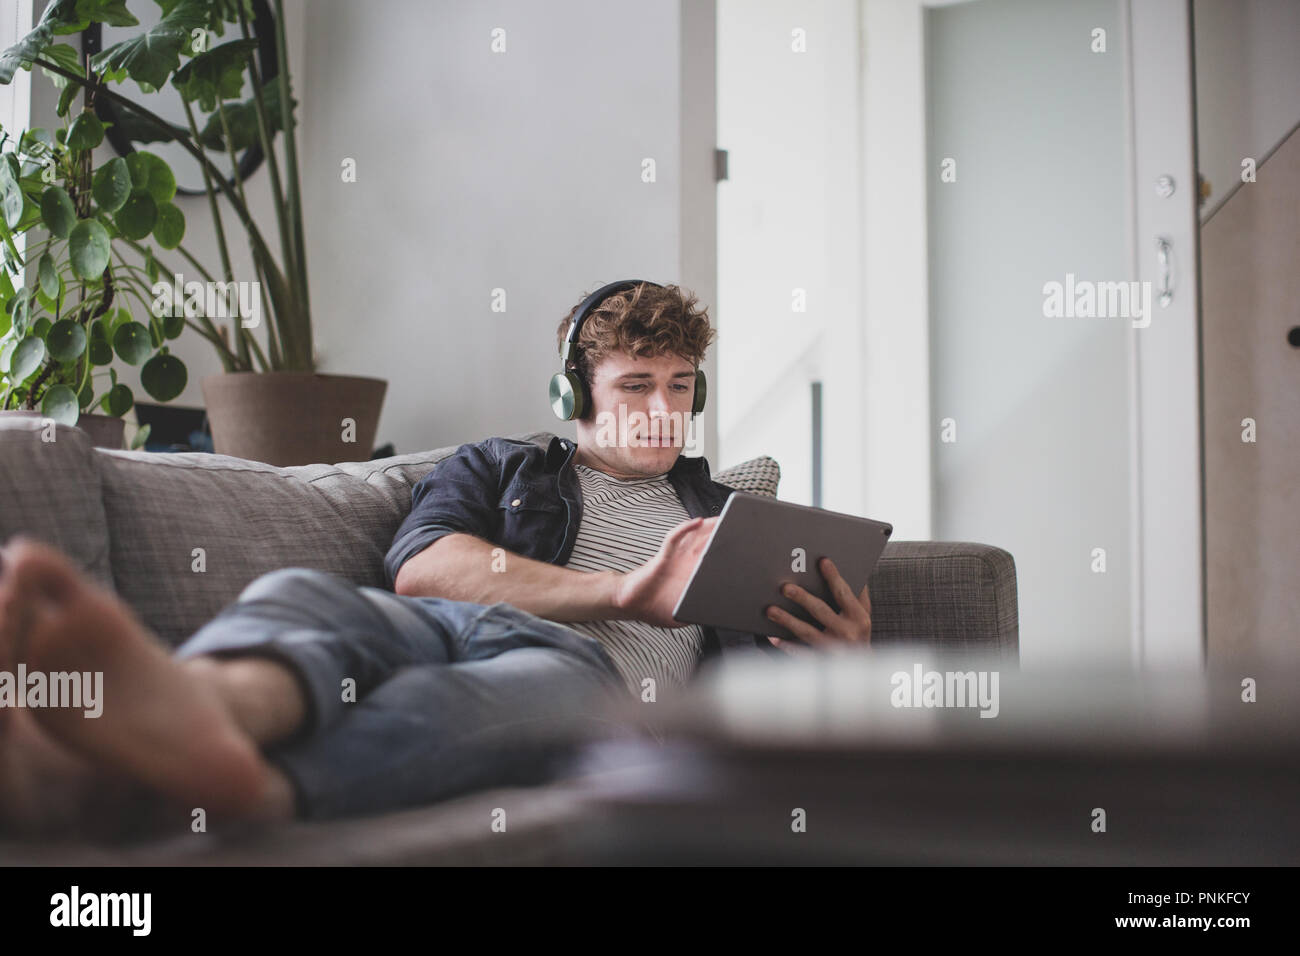 Young adult male watching video on digital tablet Stock Photo